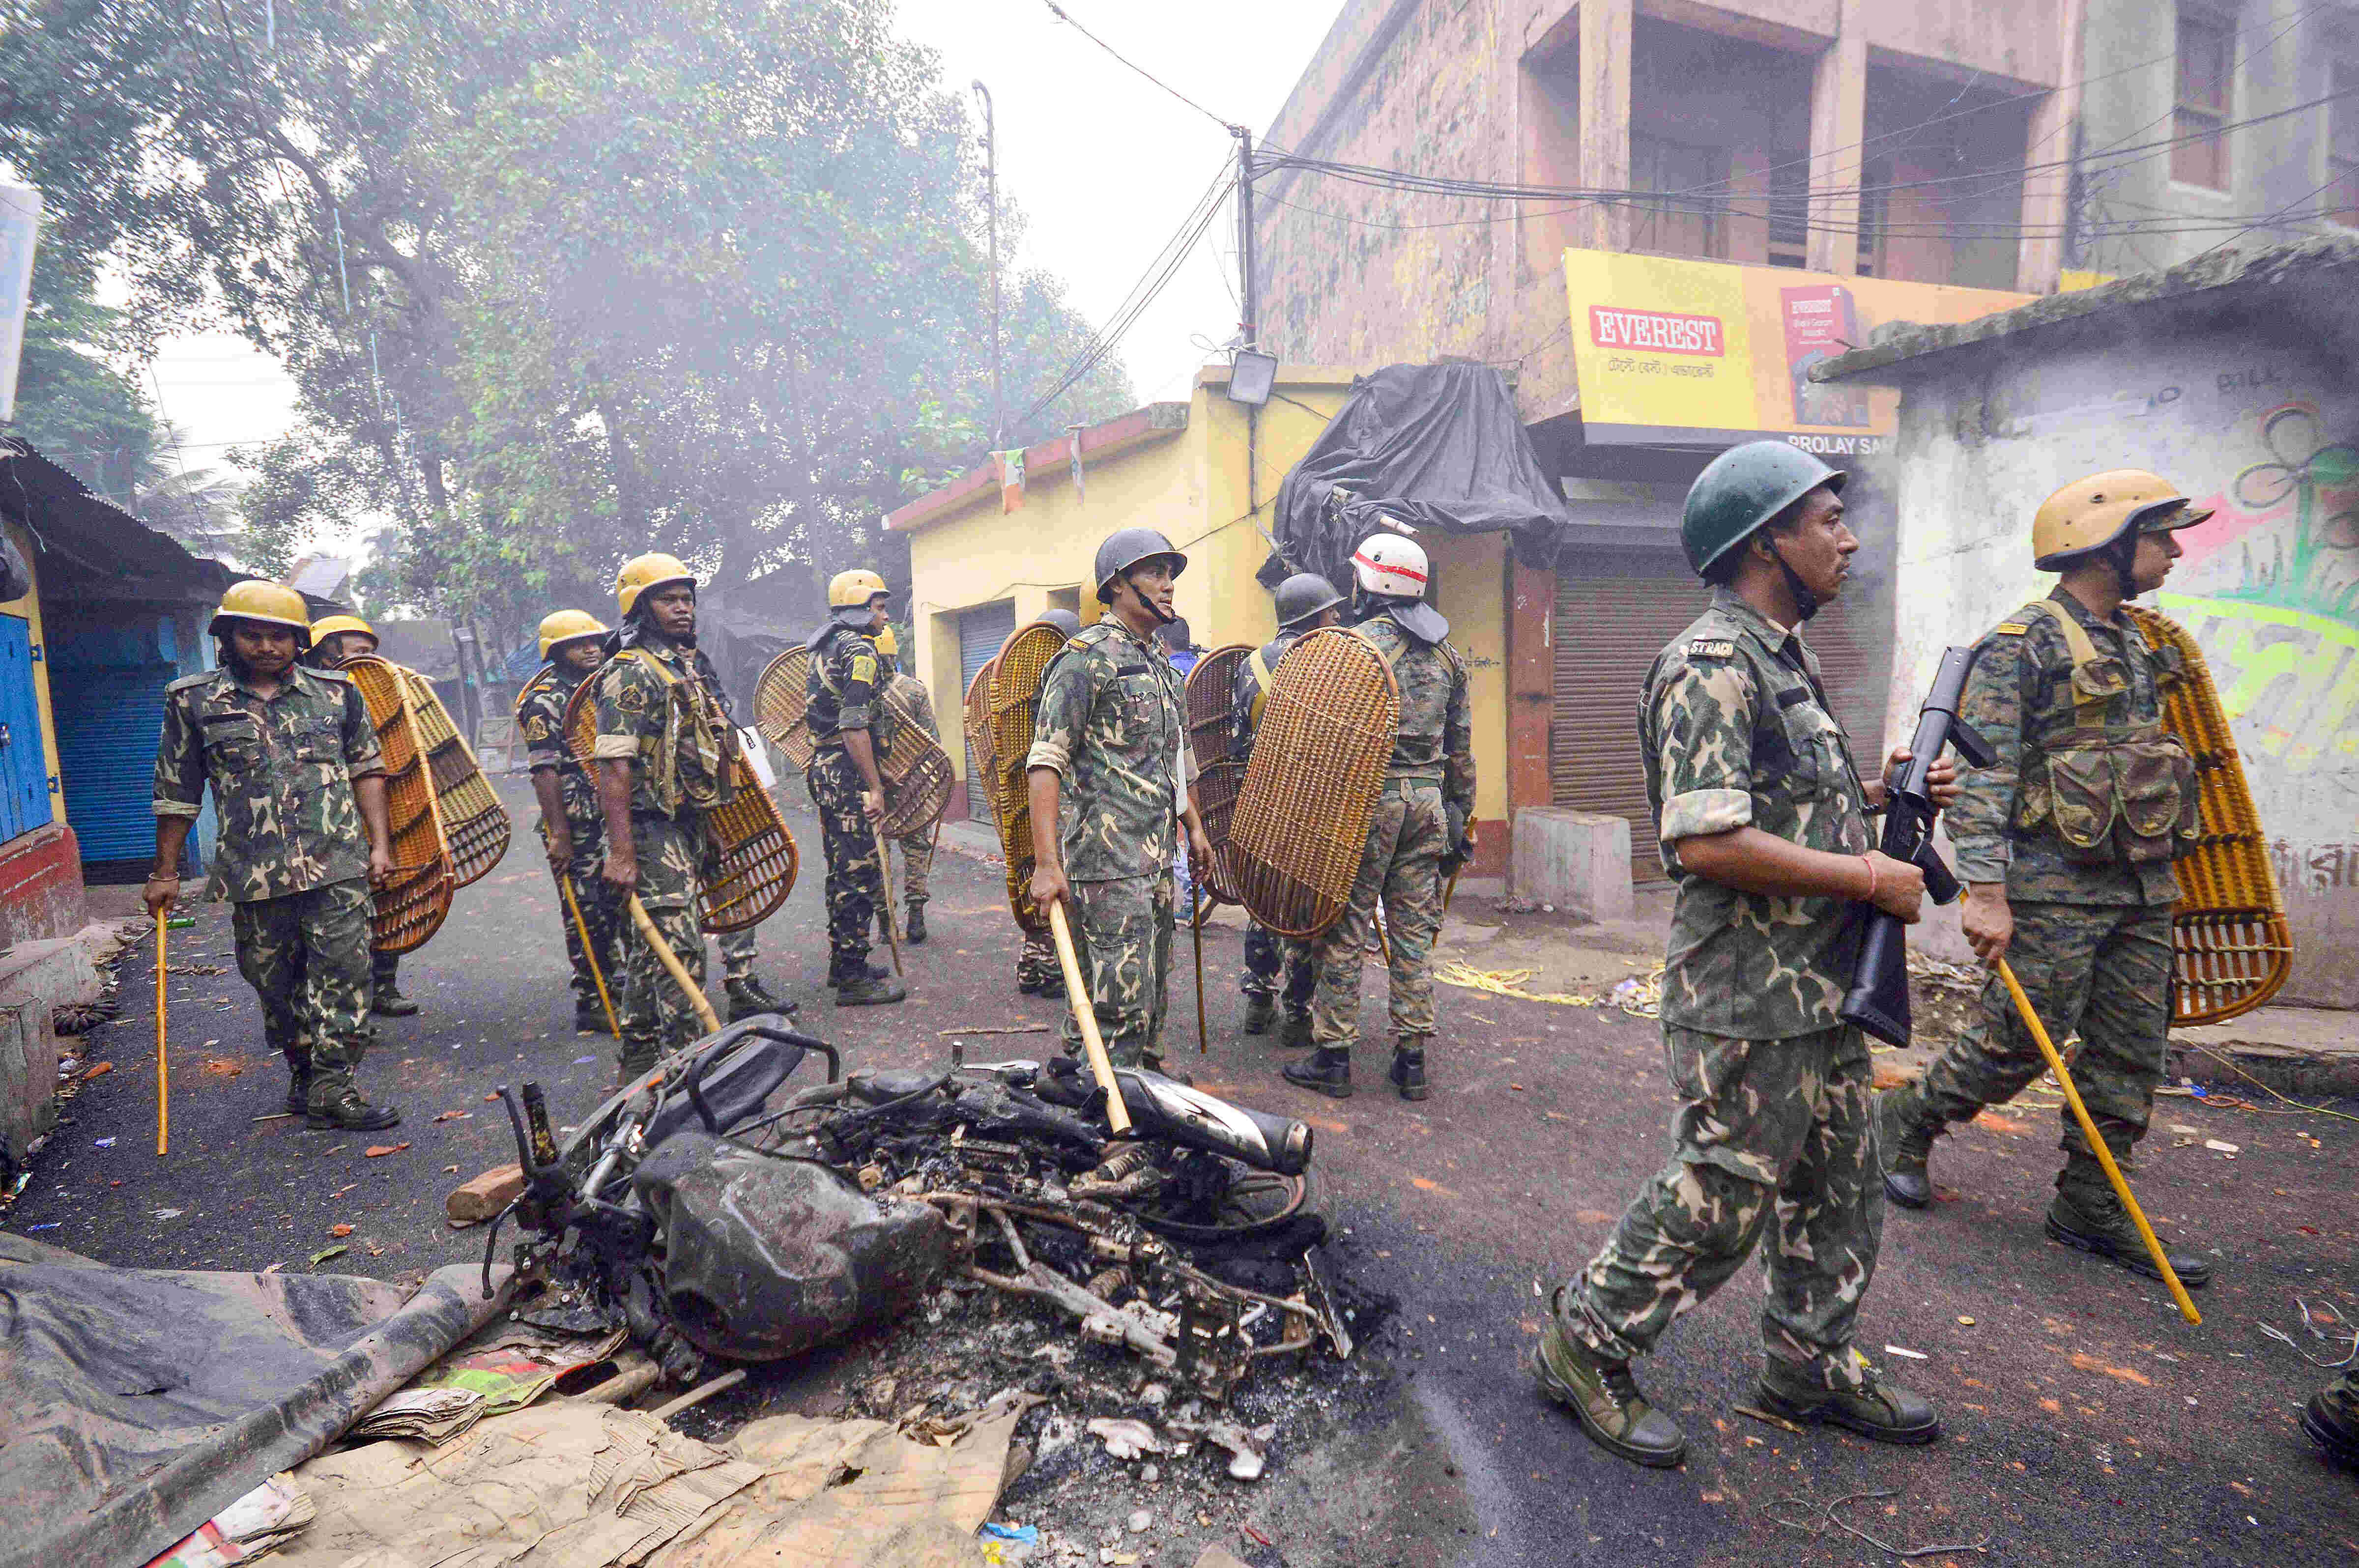 Over 200 arrested, situation in violence-hit districts of Bengal under control: DGP